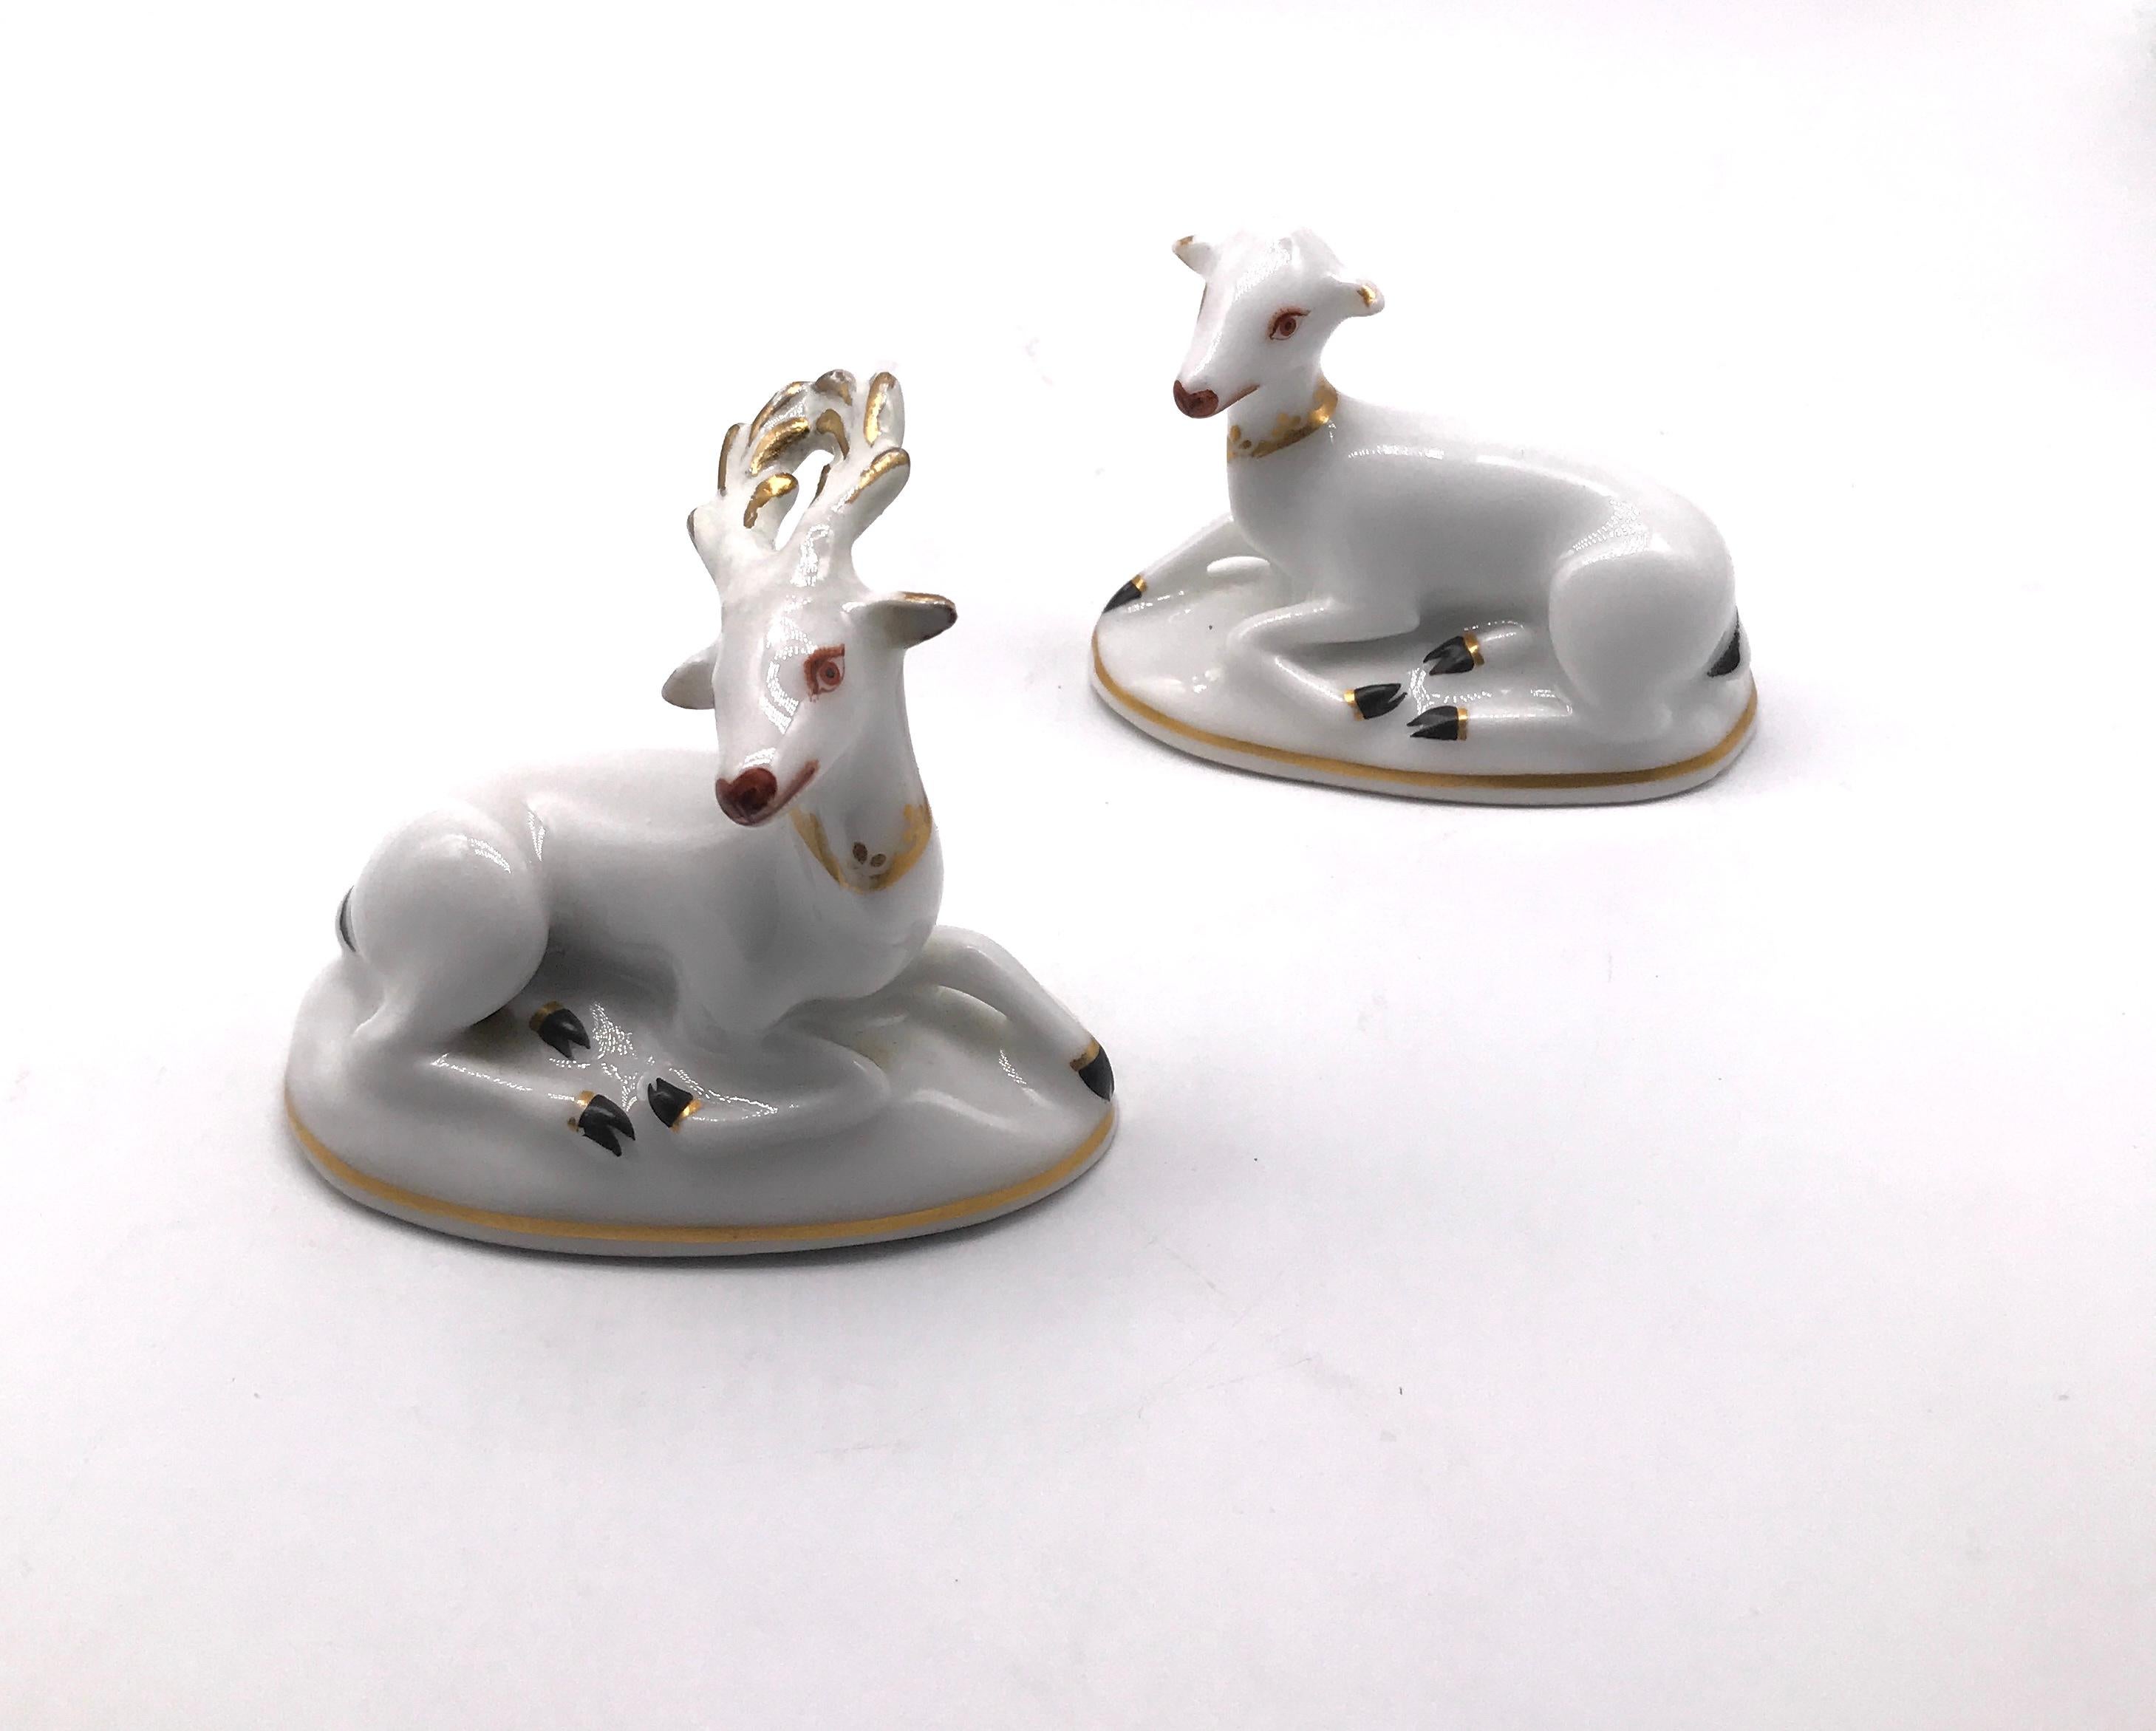 Though deer were frequently shown in porcelain, this is a rare pair of toy deer that were meant to be together and were kept together, in perfect condition, circa 1820. The pair includes a doe and stag in white and gilt, lying on an oval base,